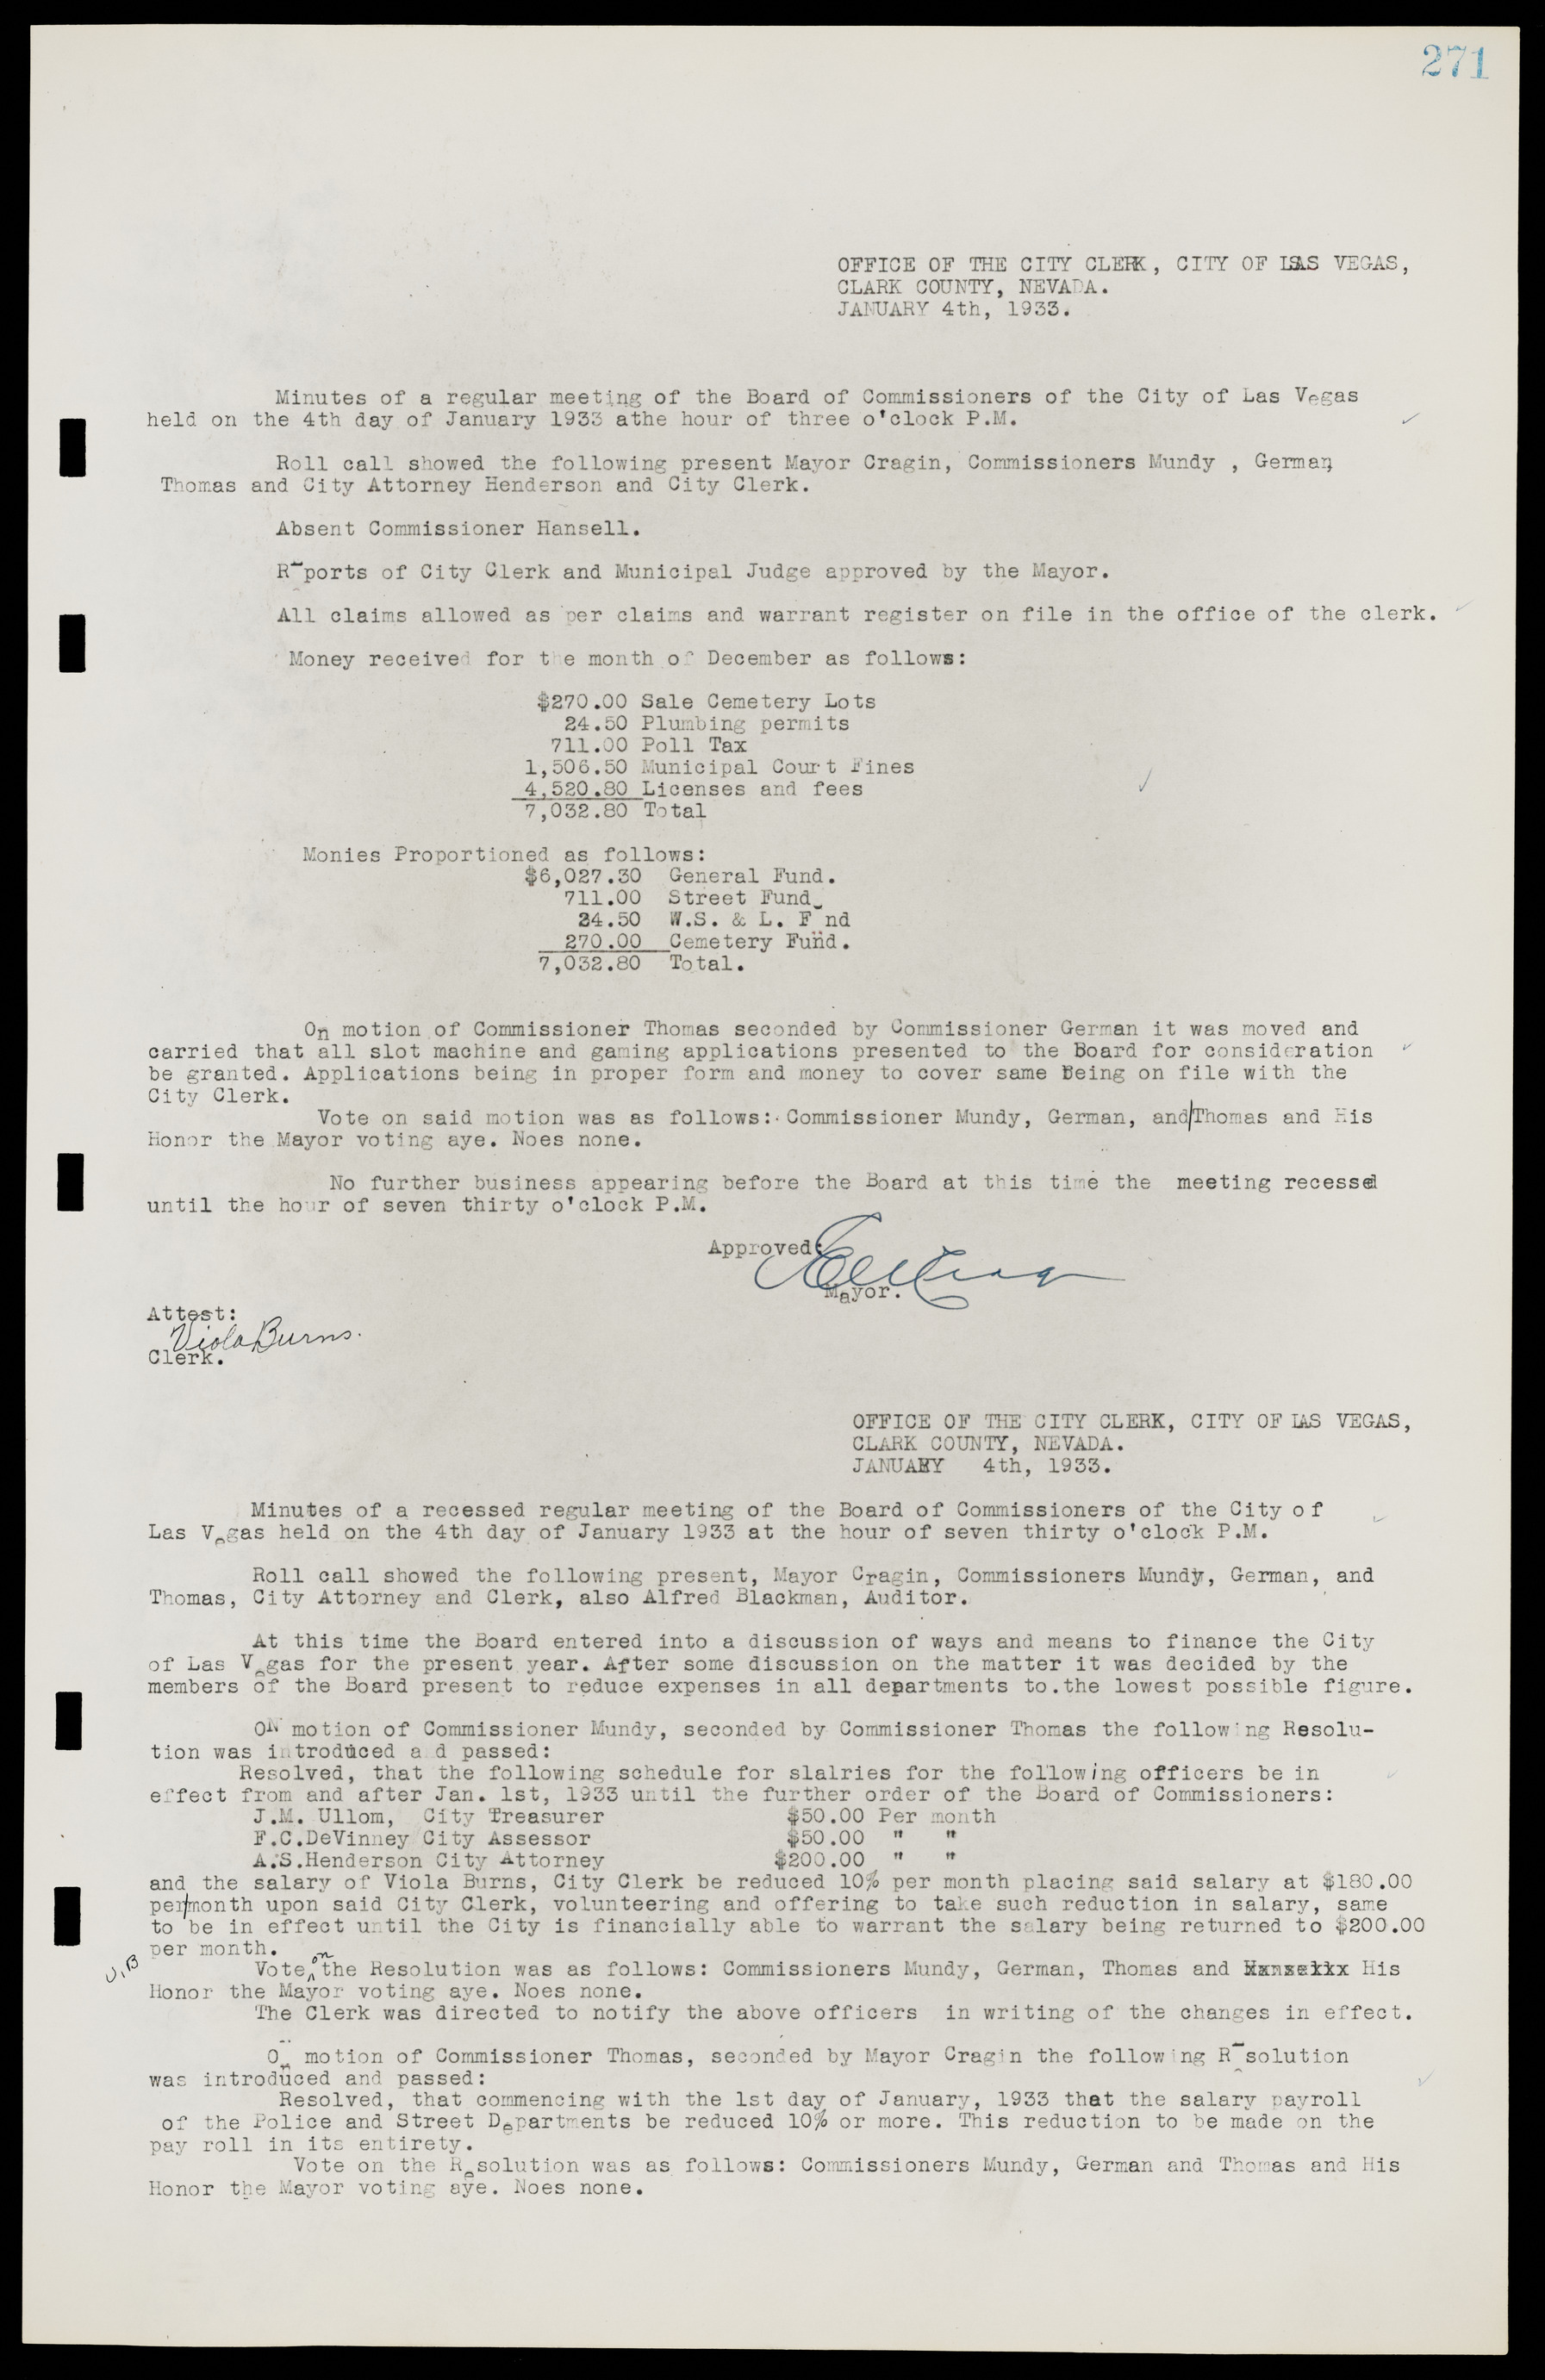 Las Vegas City Commission Minutes, May 14, 1929 to February 11, 1937, lvc000003-277